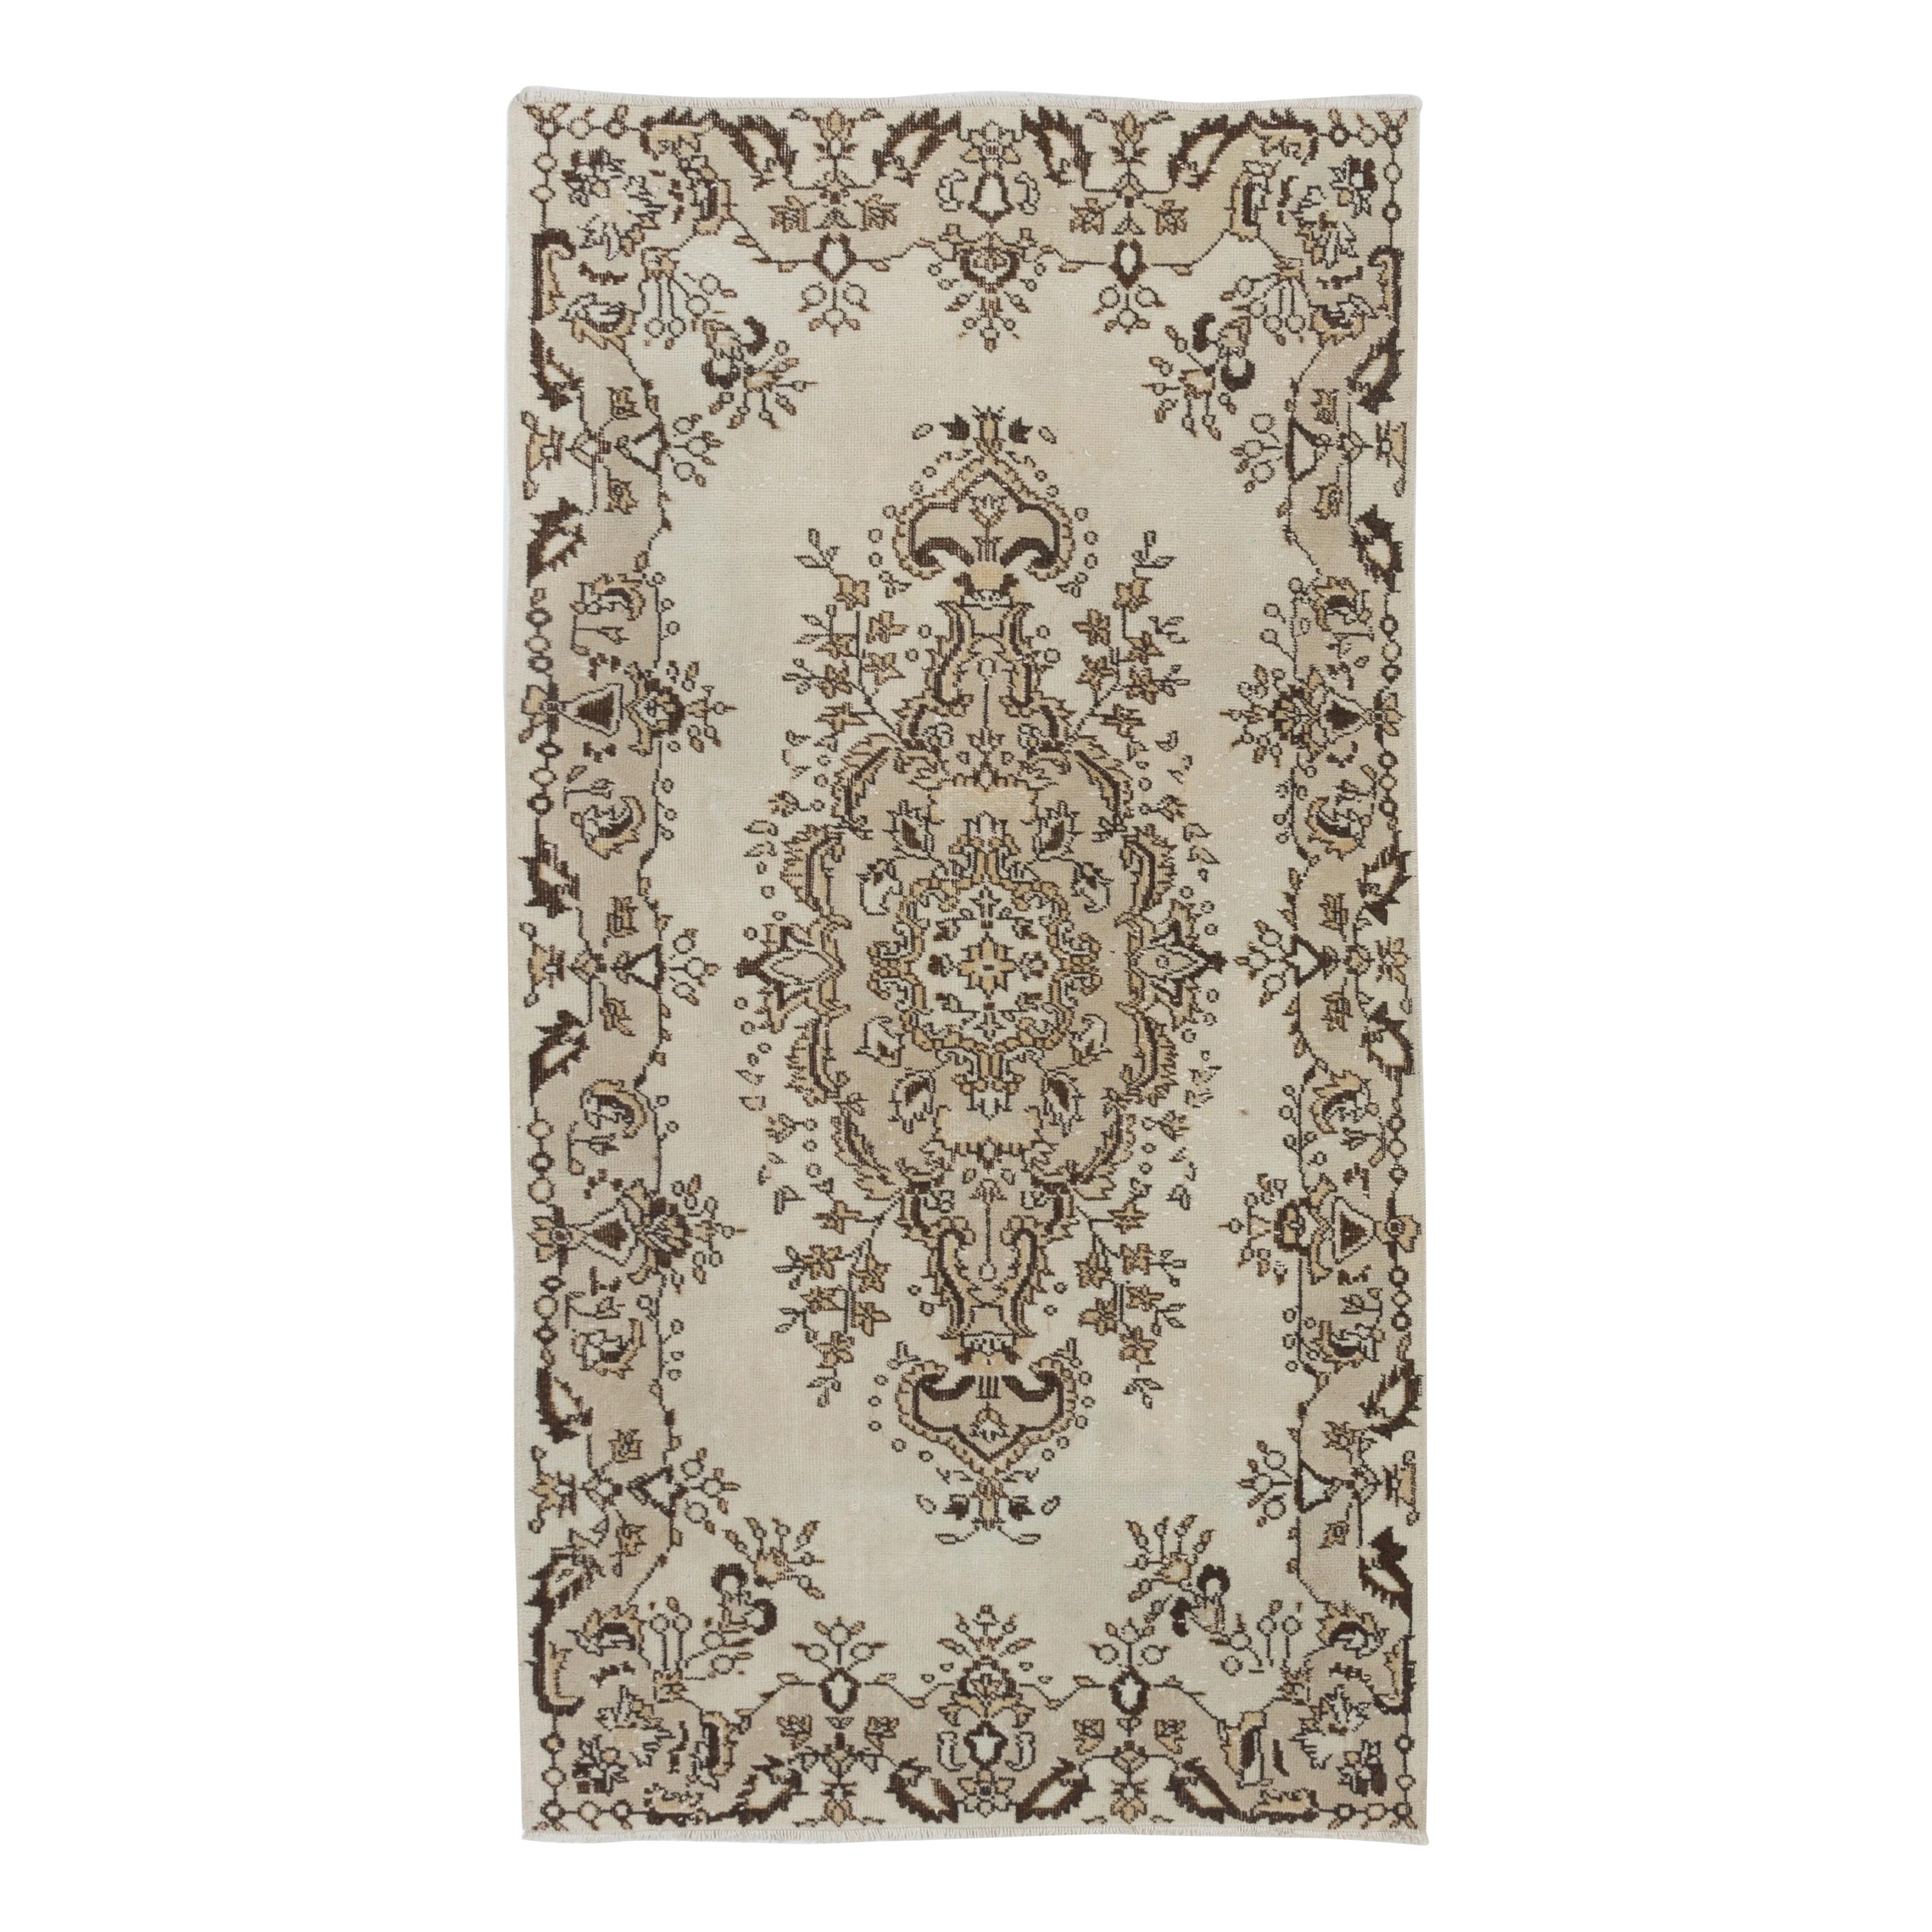 3.8x7.2 ft Turkish 1965s Rug with Medallion Design, Hand-Knotted Carpet in Beige